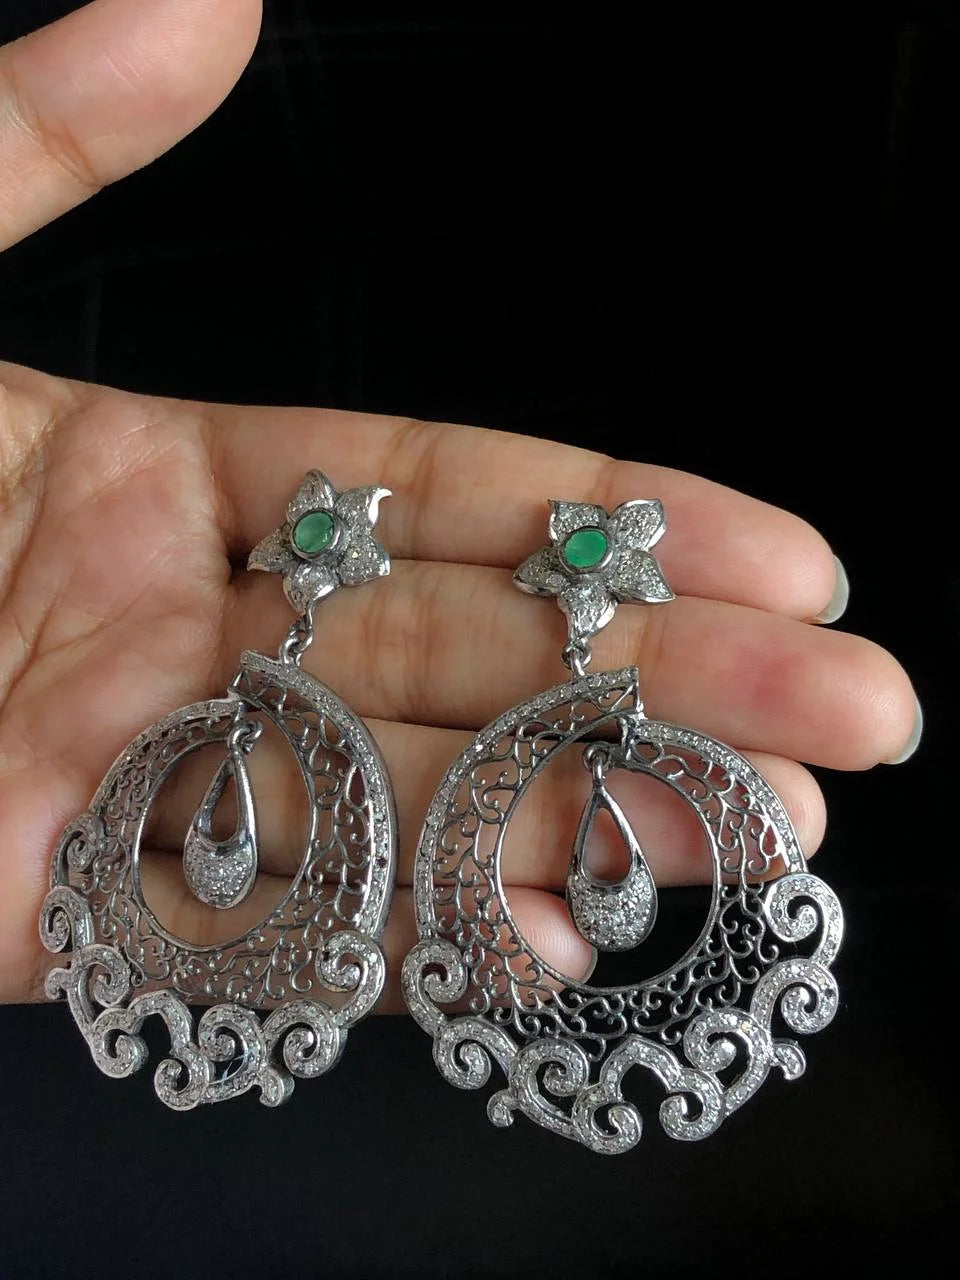 Exquisite Chandbali Earrings: 925 Sterling Silver, Perfect Wedding Gift for Her